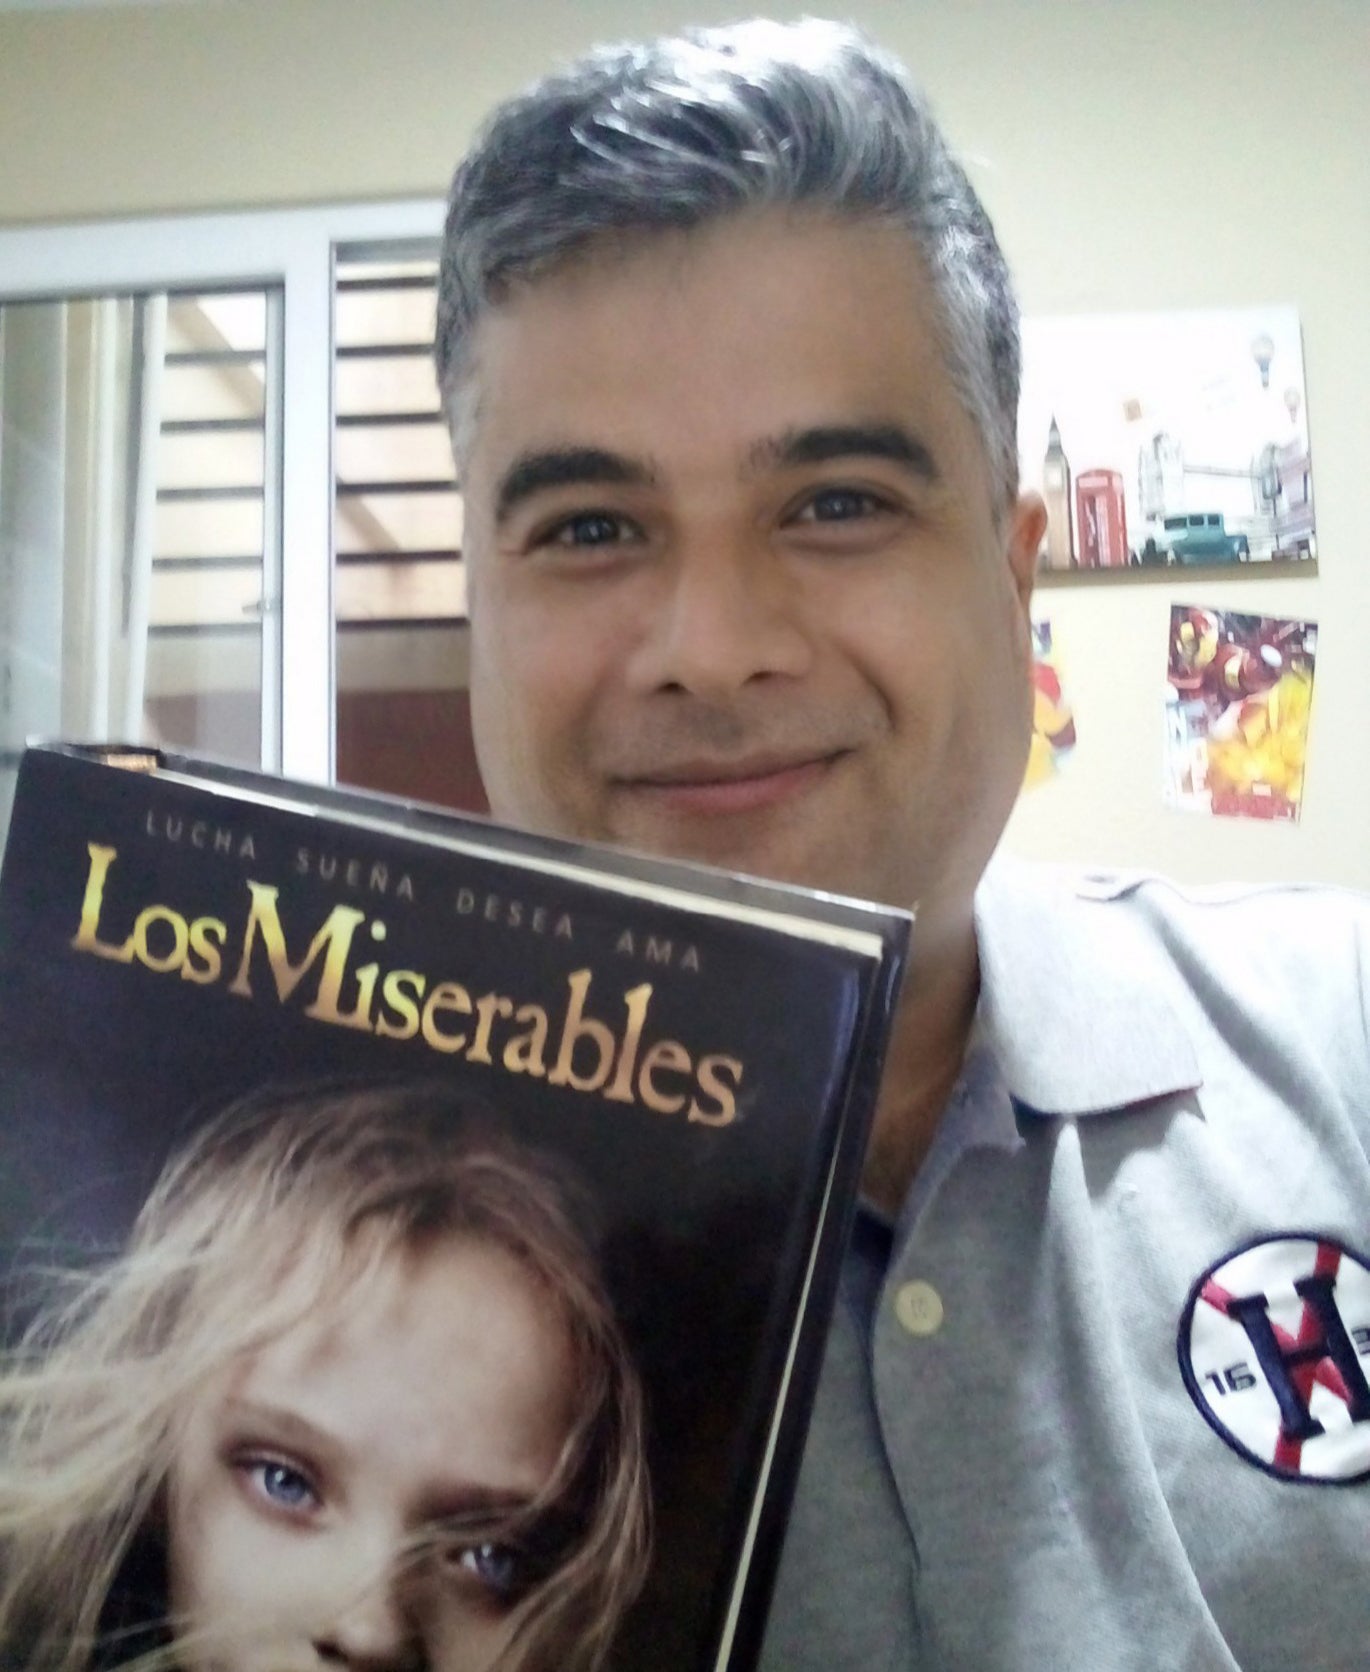 A man stands holding a book entitled "Los Miserables"